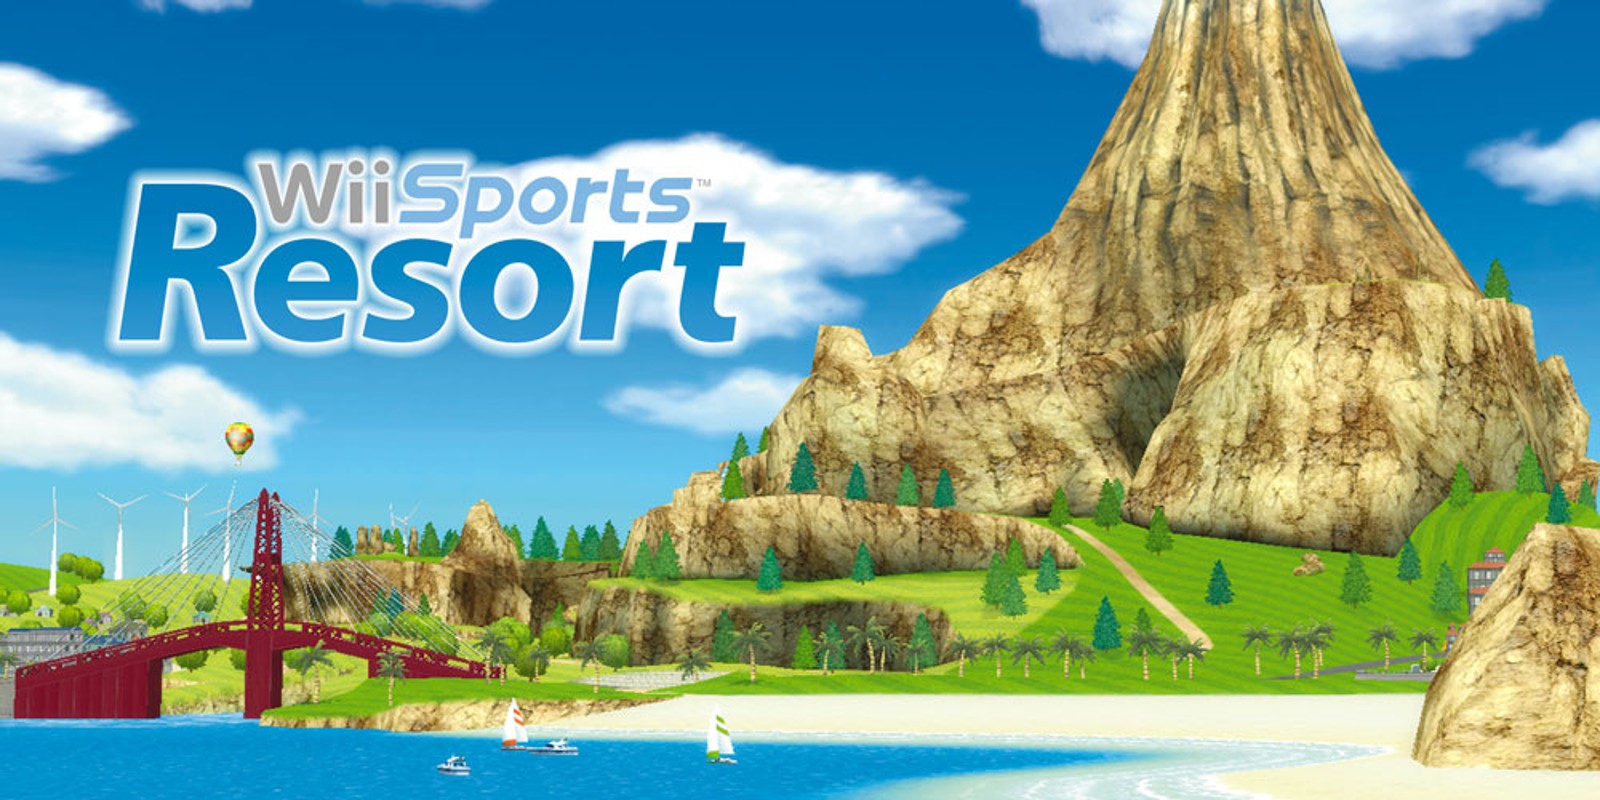 Wii Sports Resort - Most Downloaded PC Video Games in the World